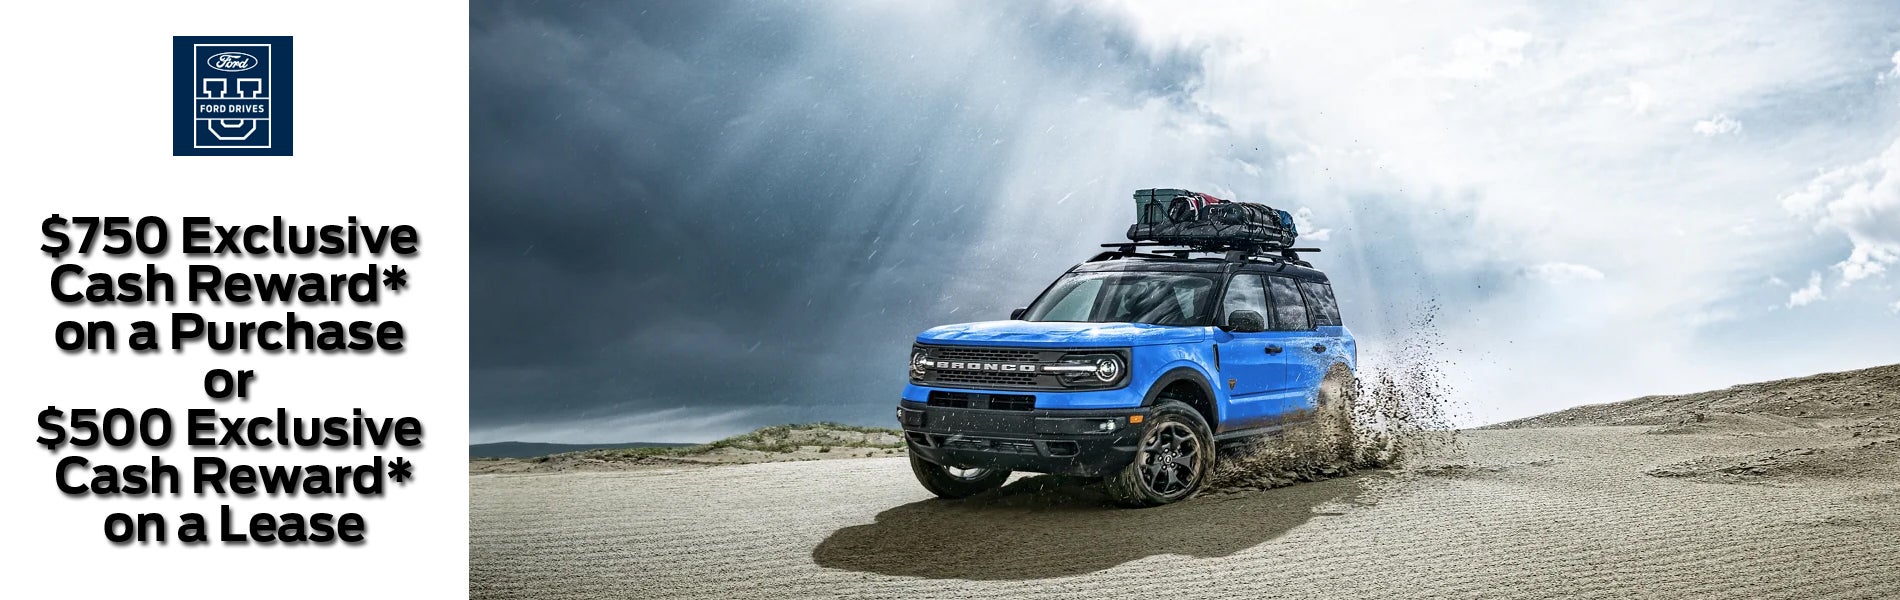 A blue Ford Bronco Sport driving on sand dunes with sun rays coming through a cloudy sky.